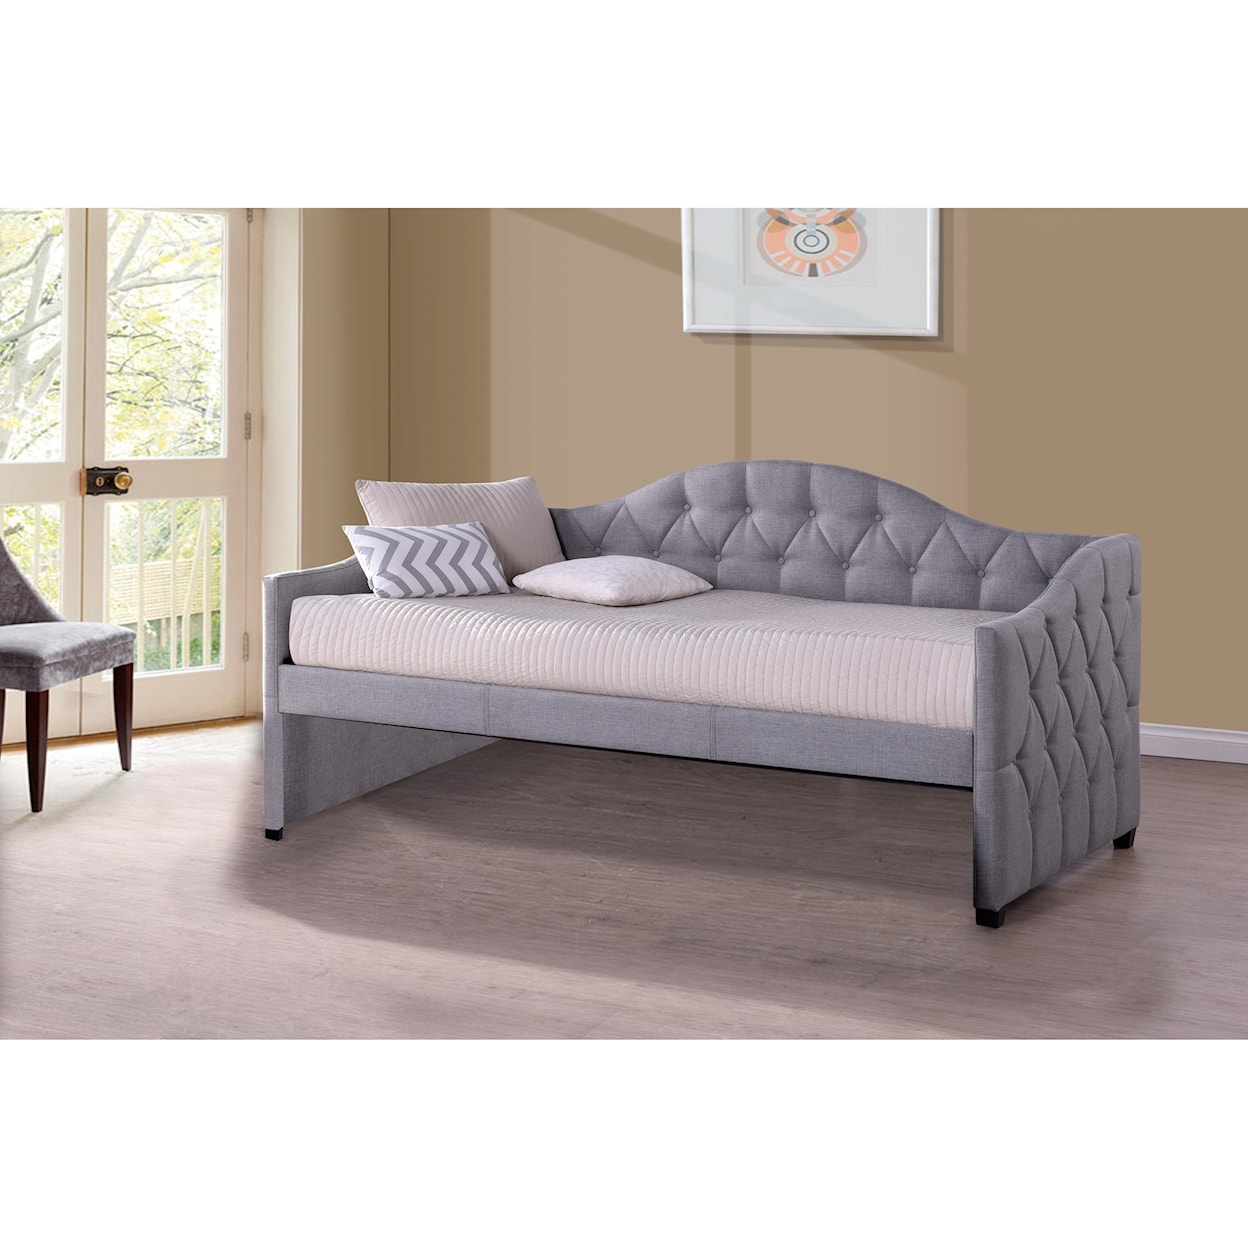 Hillsdale Daybeds Daybed